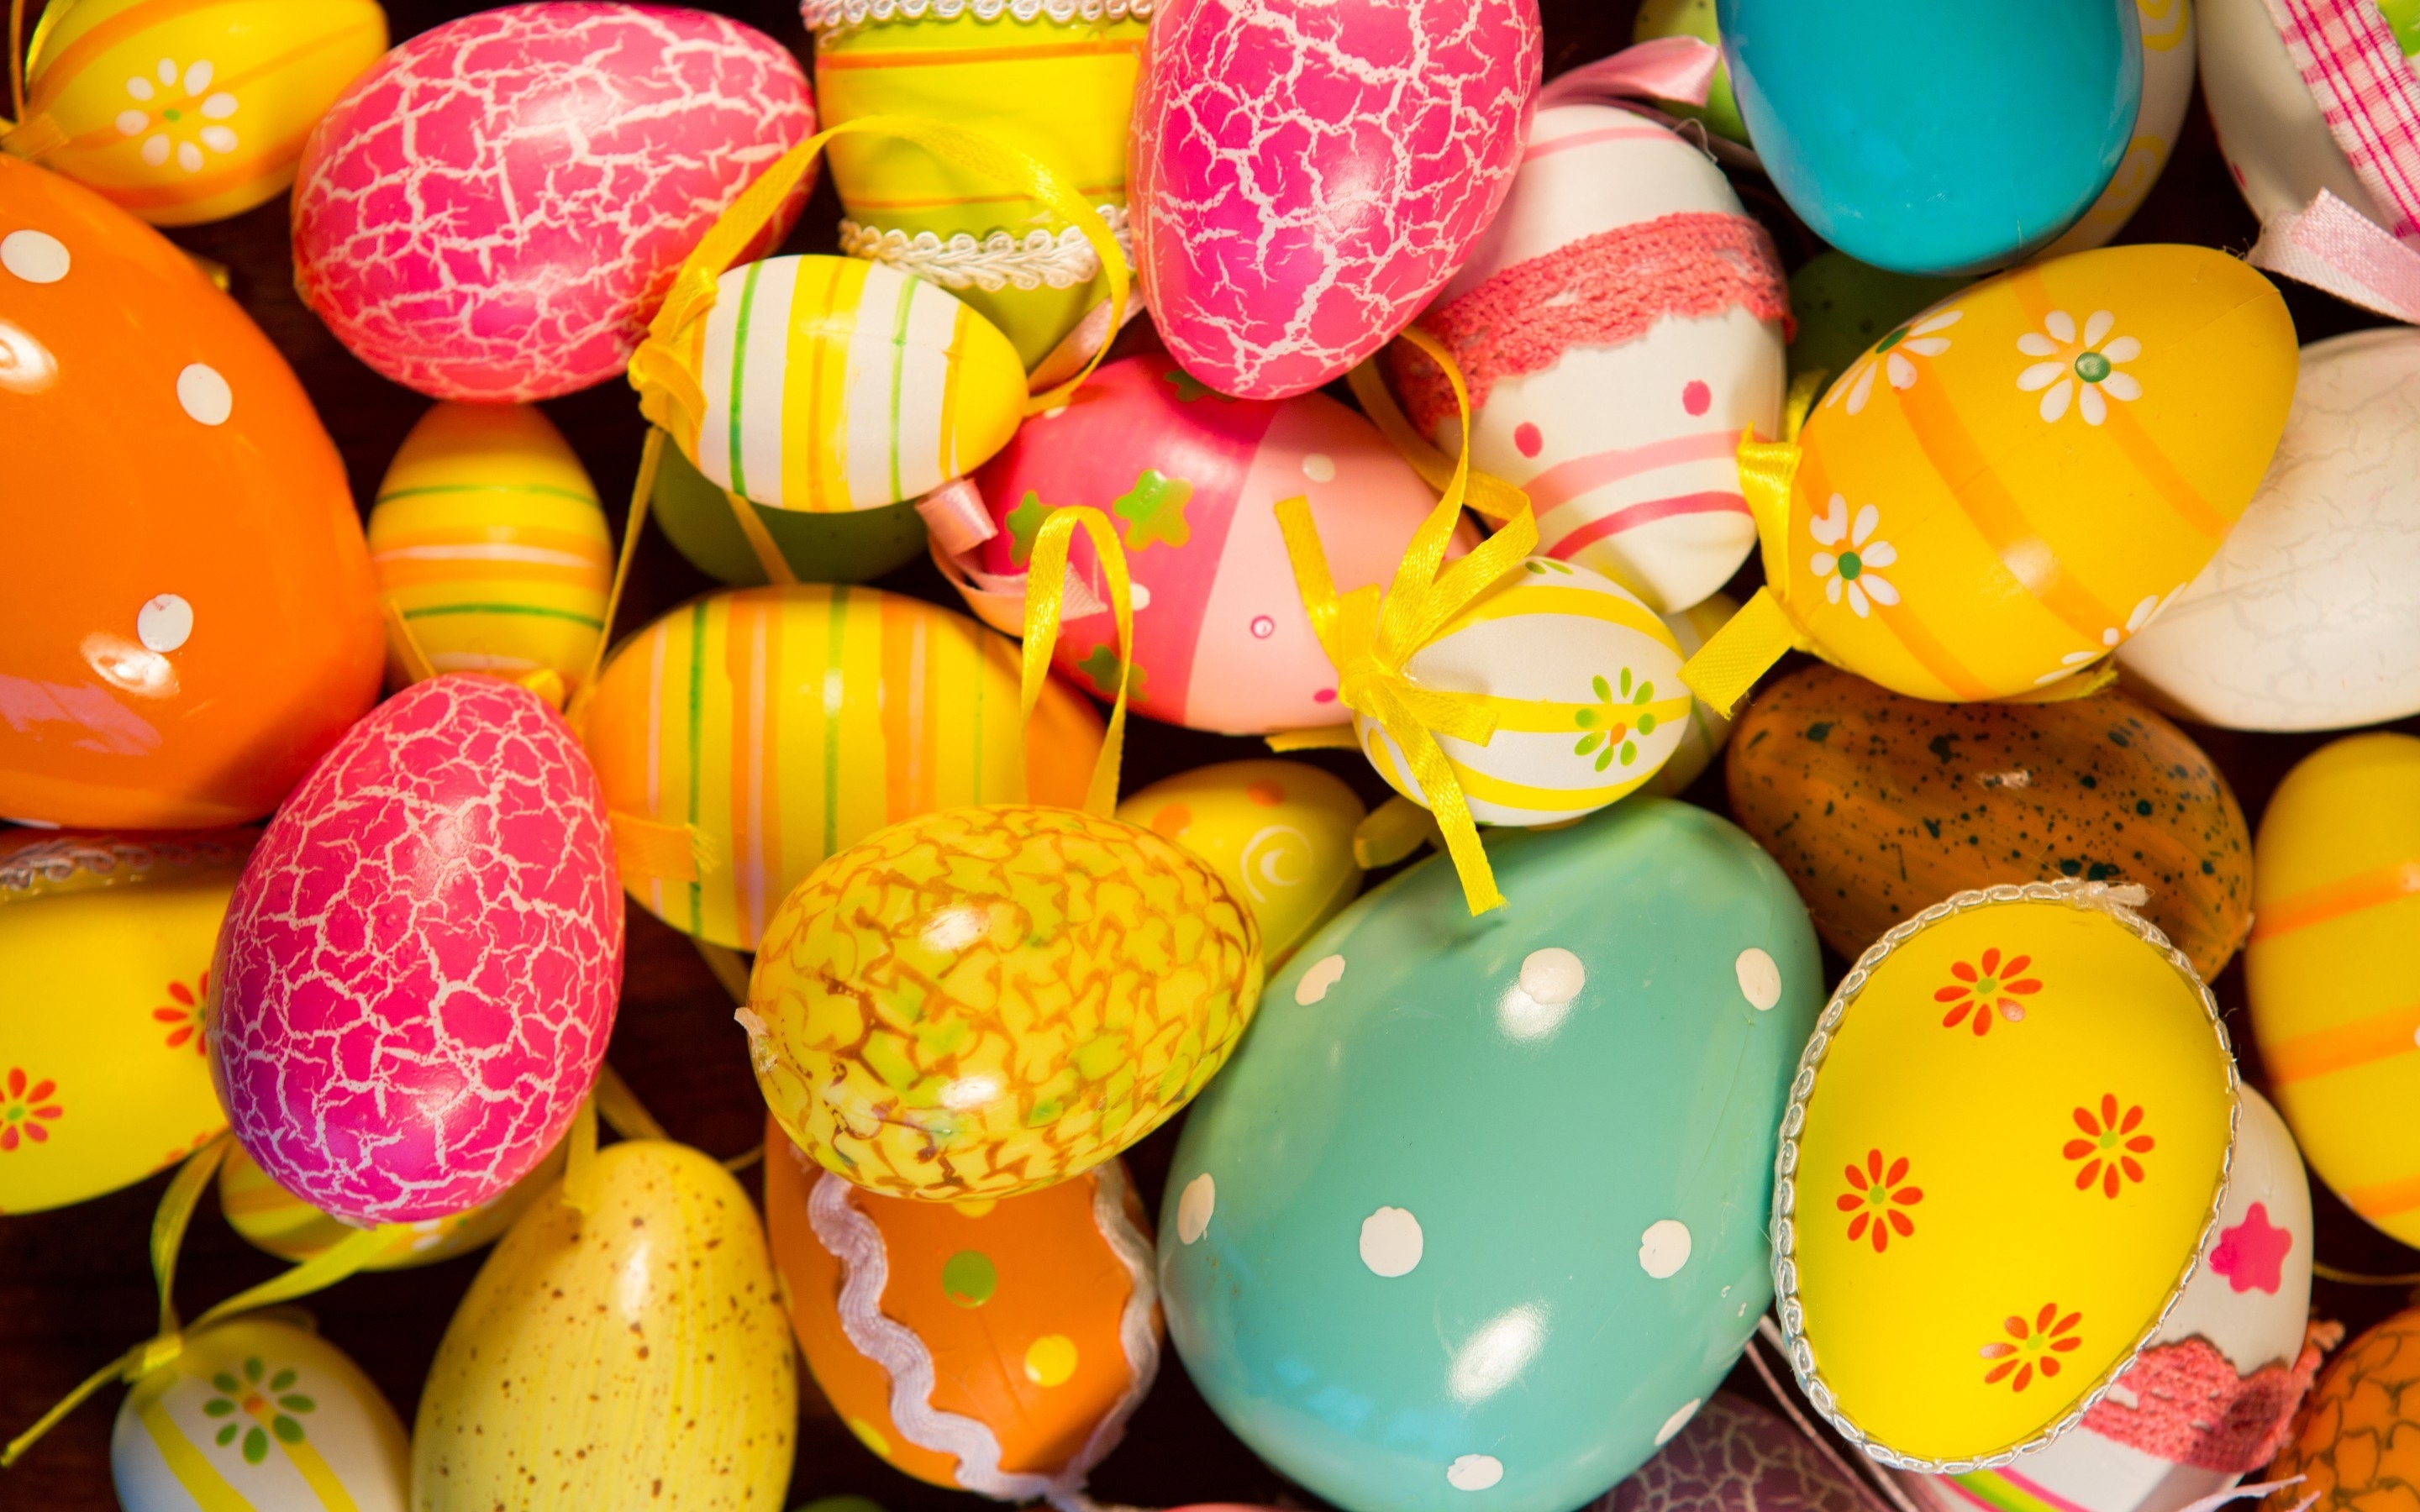 Easter Eggs Models for 2880 x 1800 Retina Display resolution